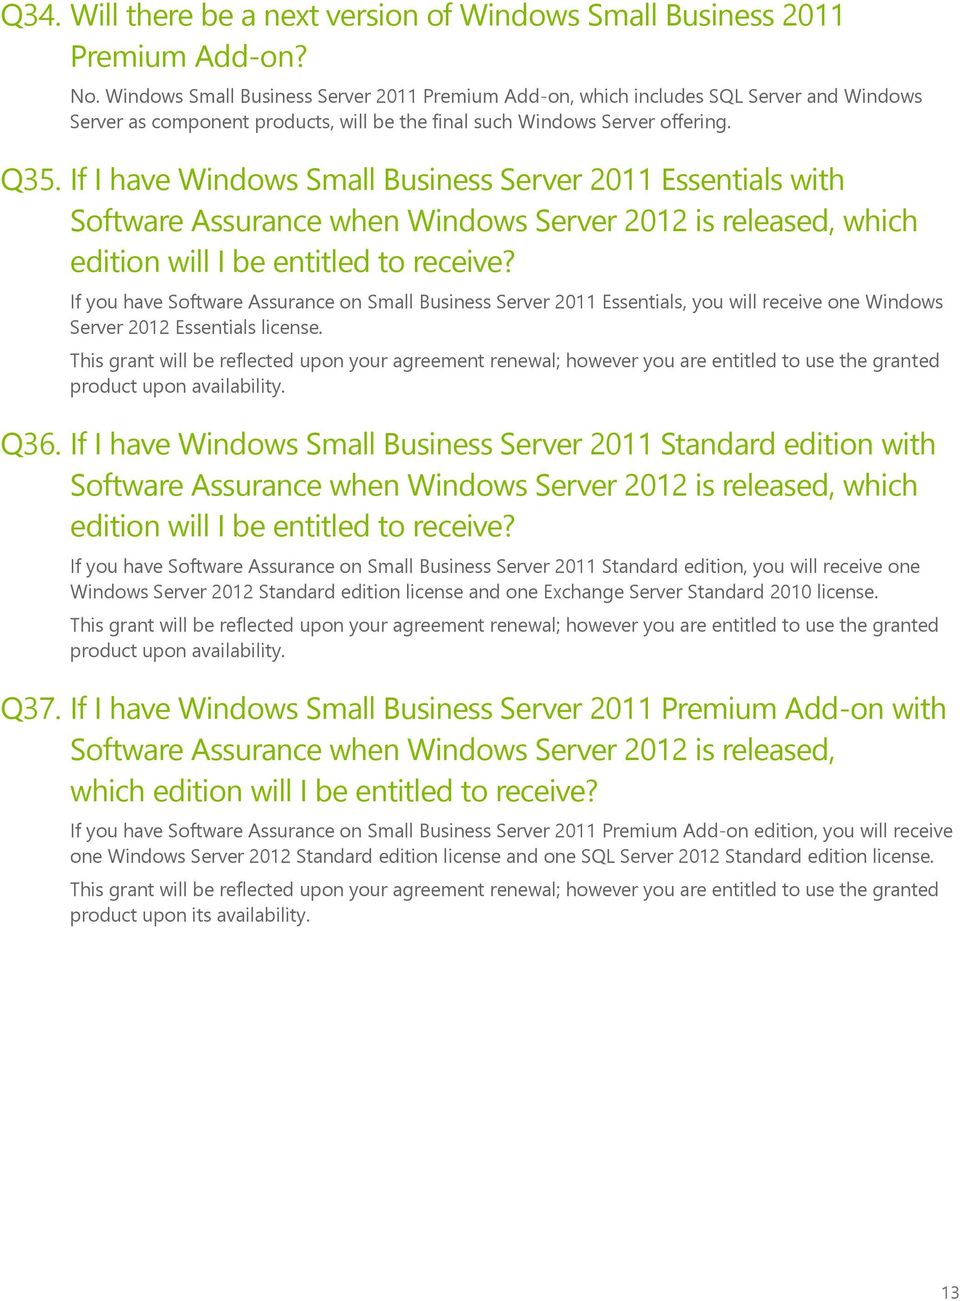 If I have Windows Small Business Server 2011 Essentials with Software Assurance when Windows Server 2012 is released, which edition will I be entitled to receive?